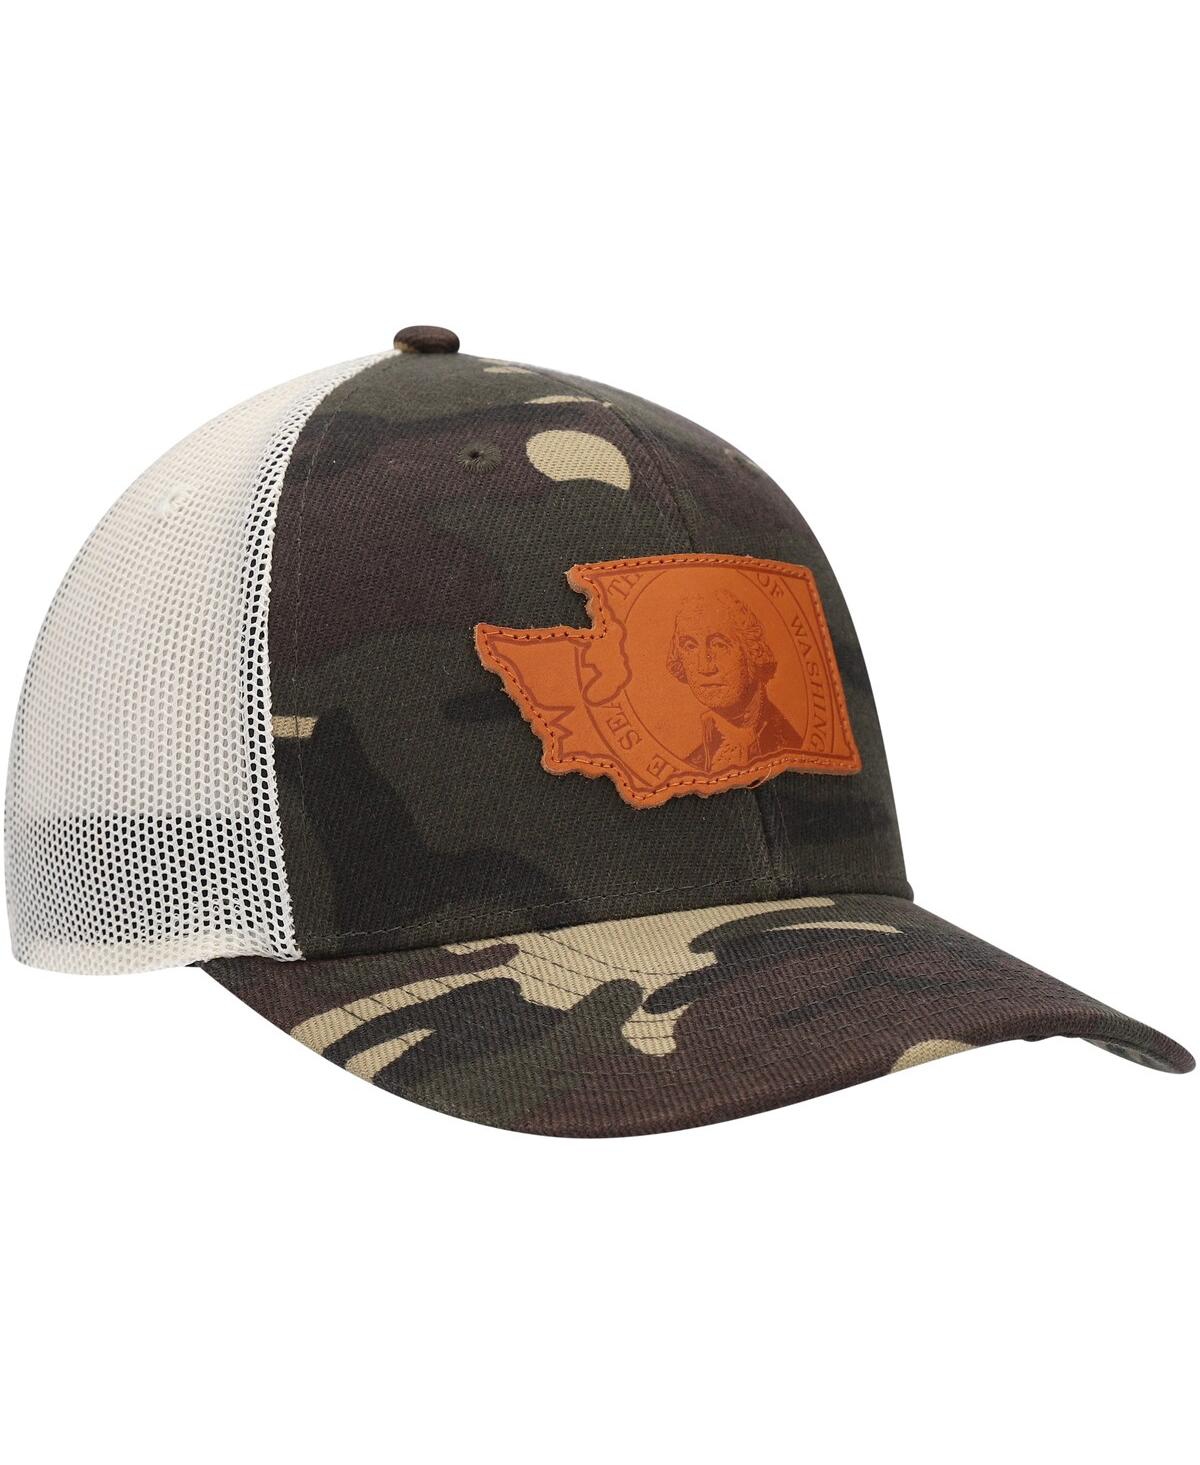 Shop Local Crowns Men's  Camo Washington Icon Woodland State Patch Trucker Snapback Hat